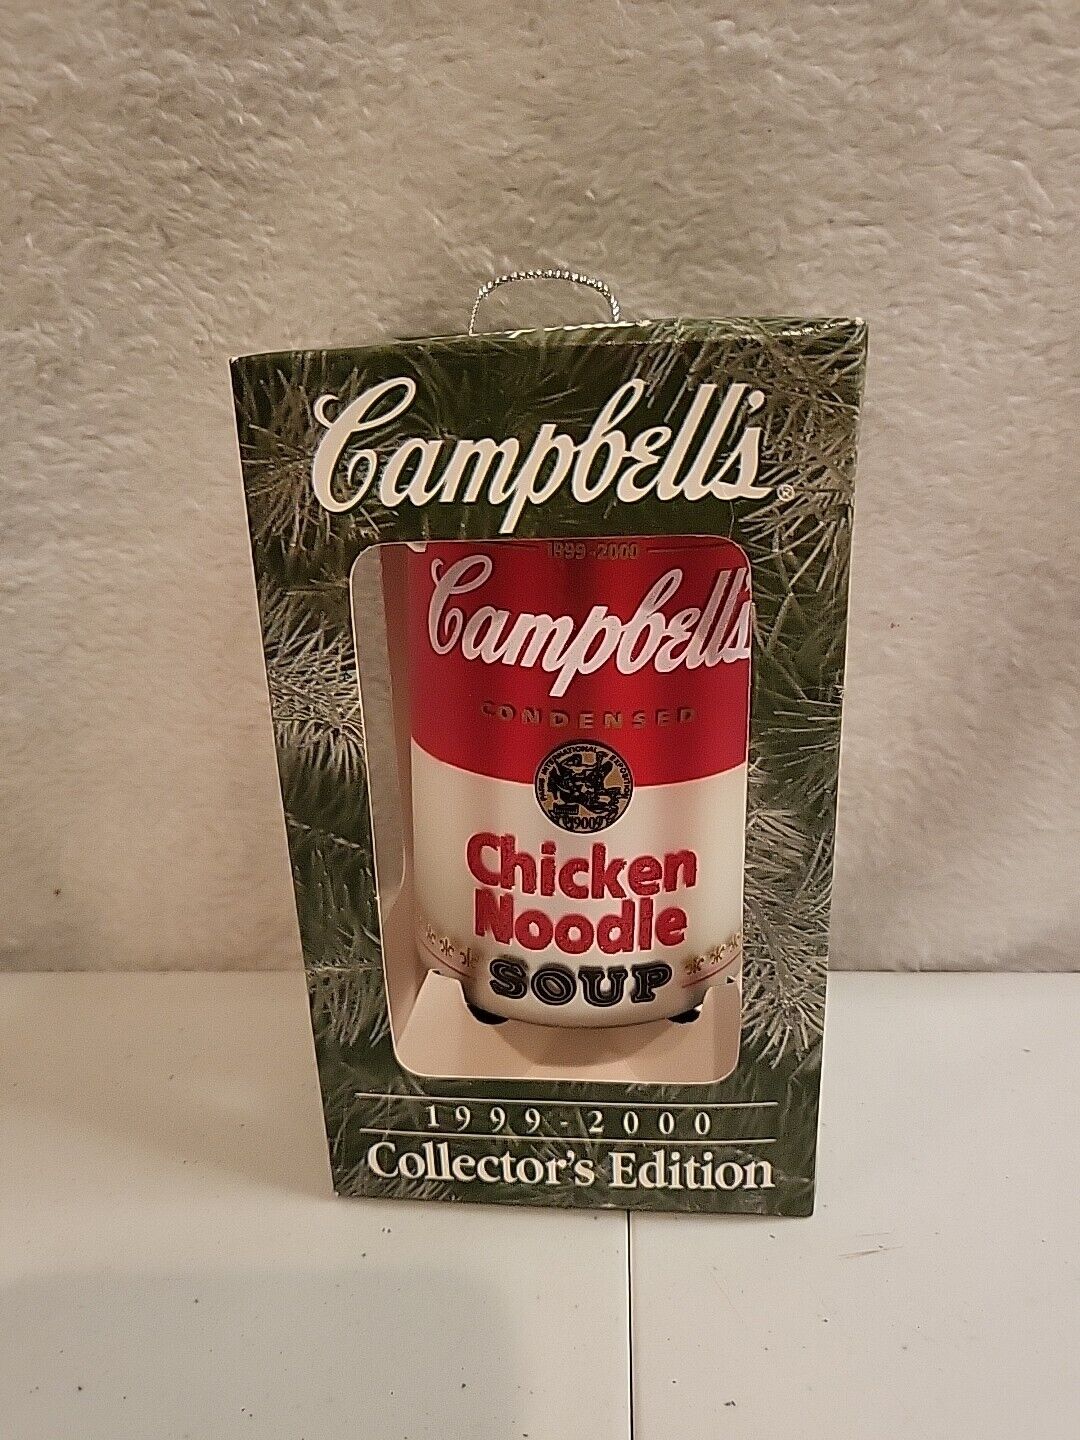 RARE FIND- Vintage Campbell's Collection Edition Glass Soup Can Ornament